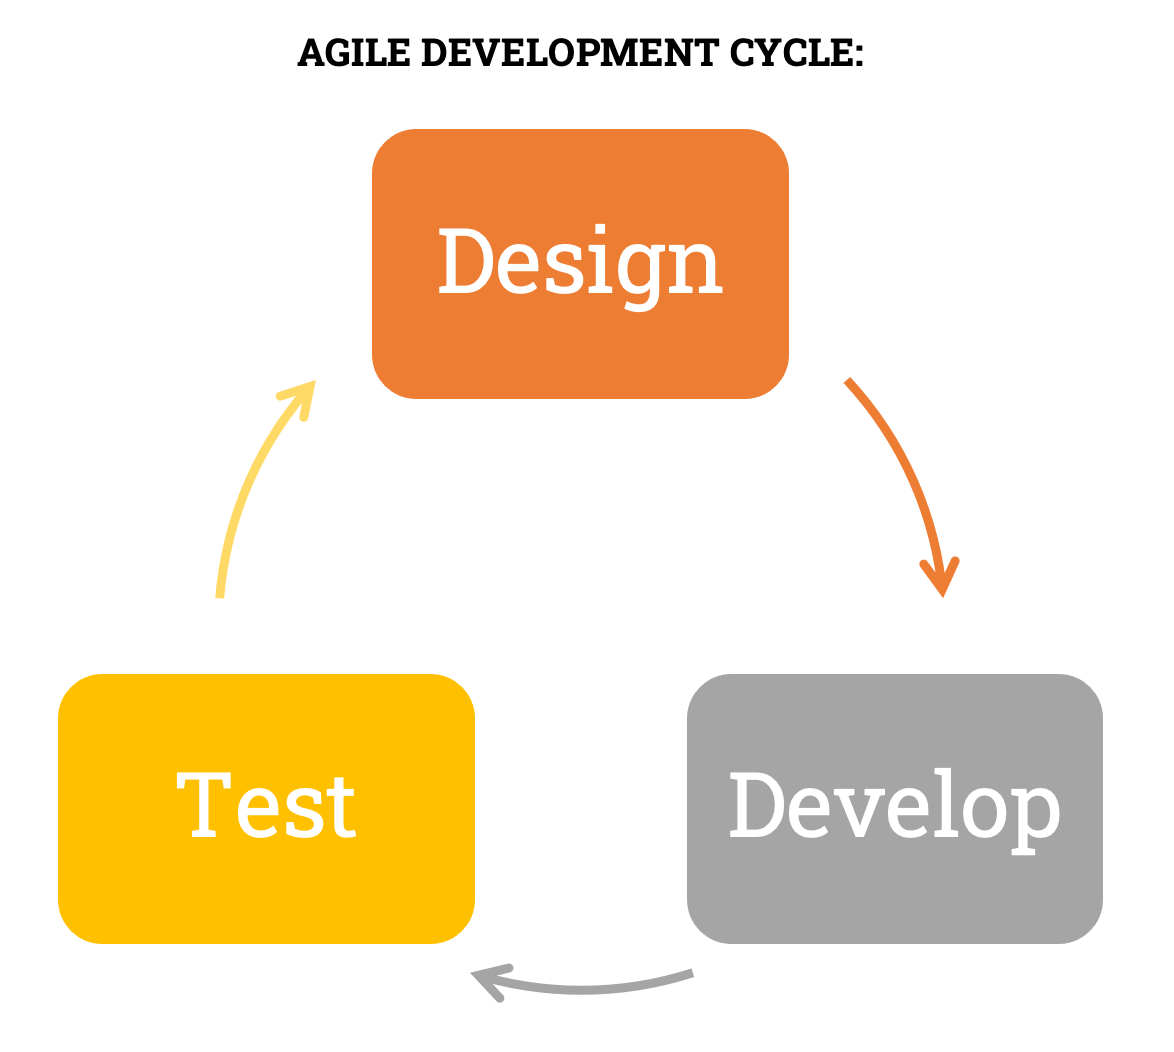 Agile in project management - the typical cycle